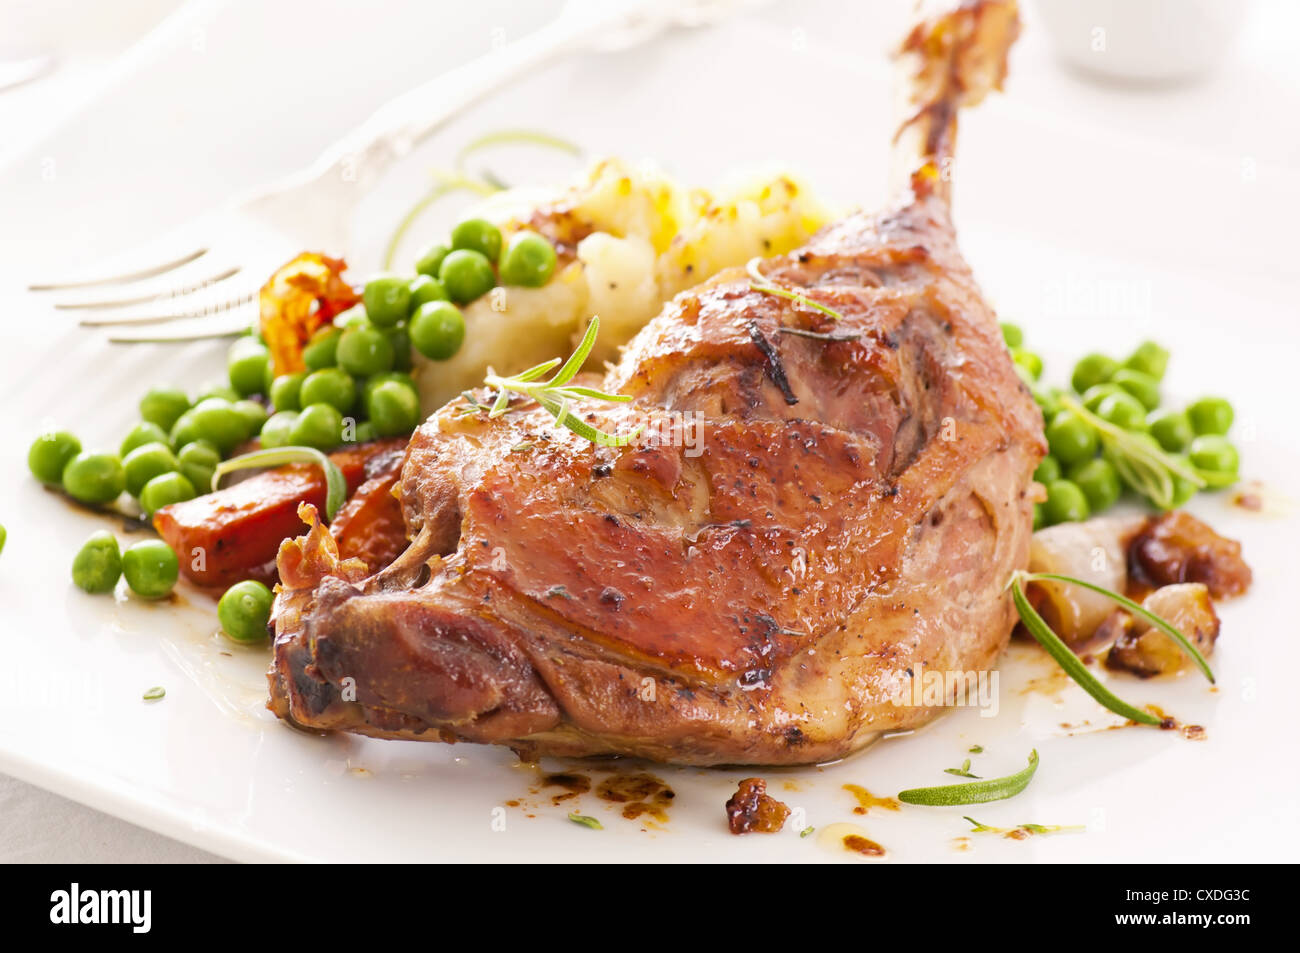 duck roasted with vegetables Stock Photo